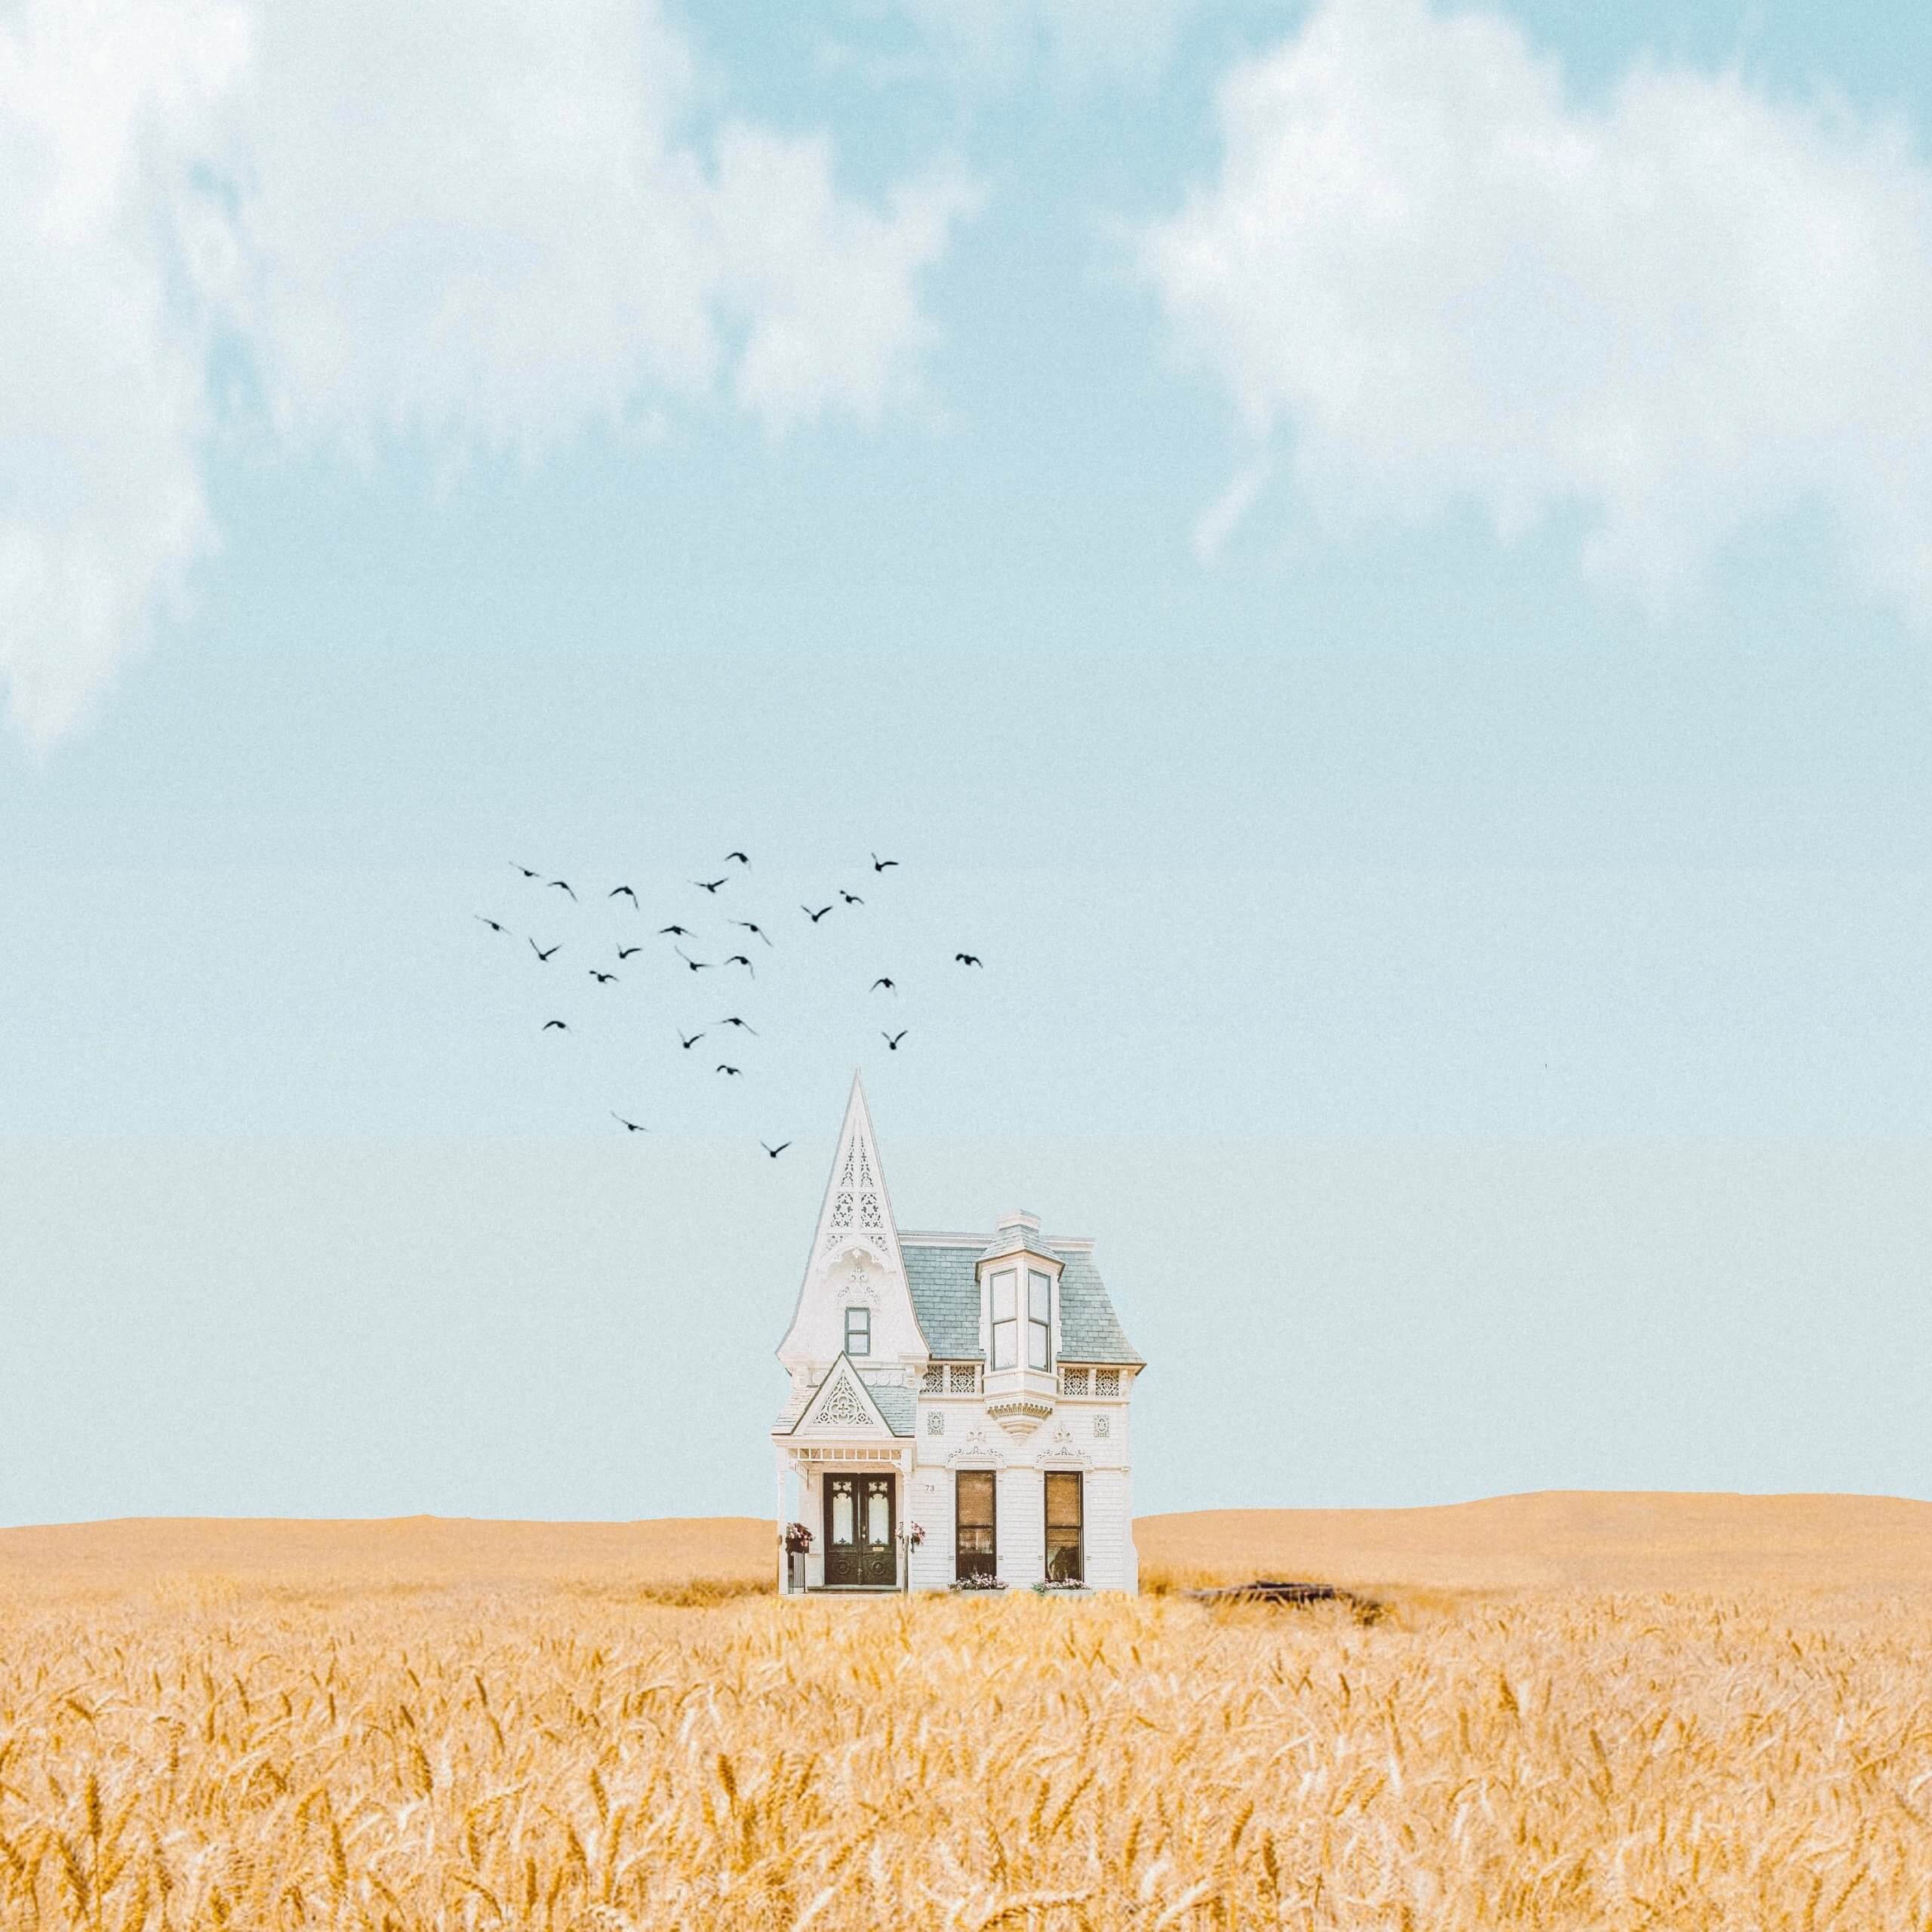 house in the middle of a corn field